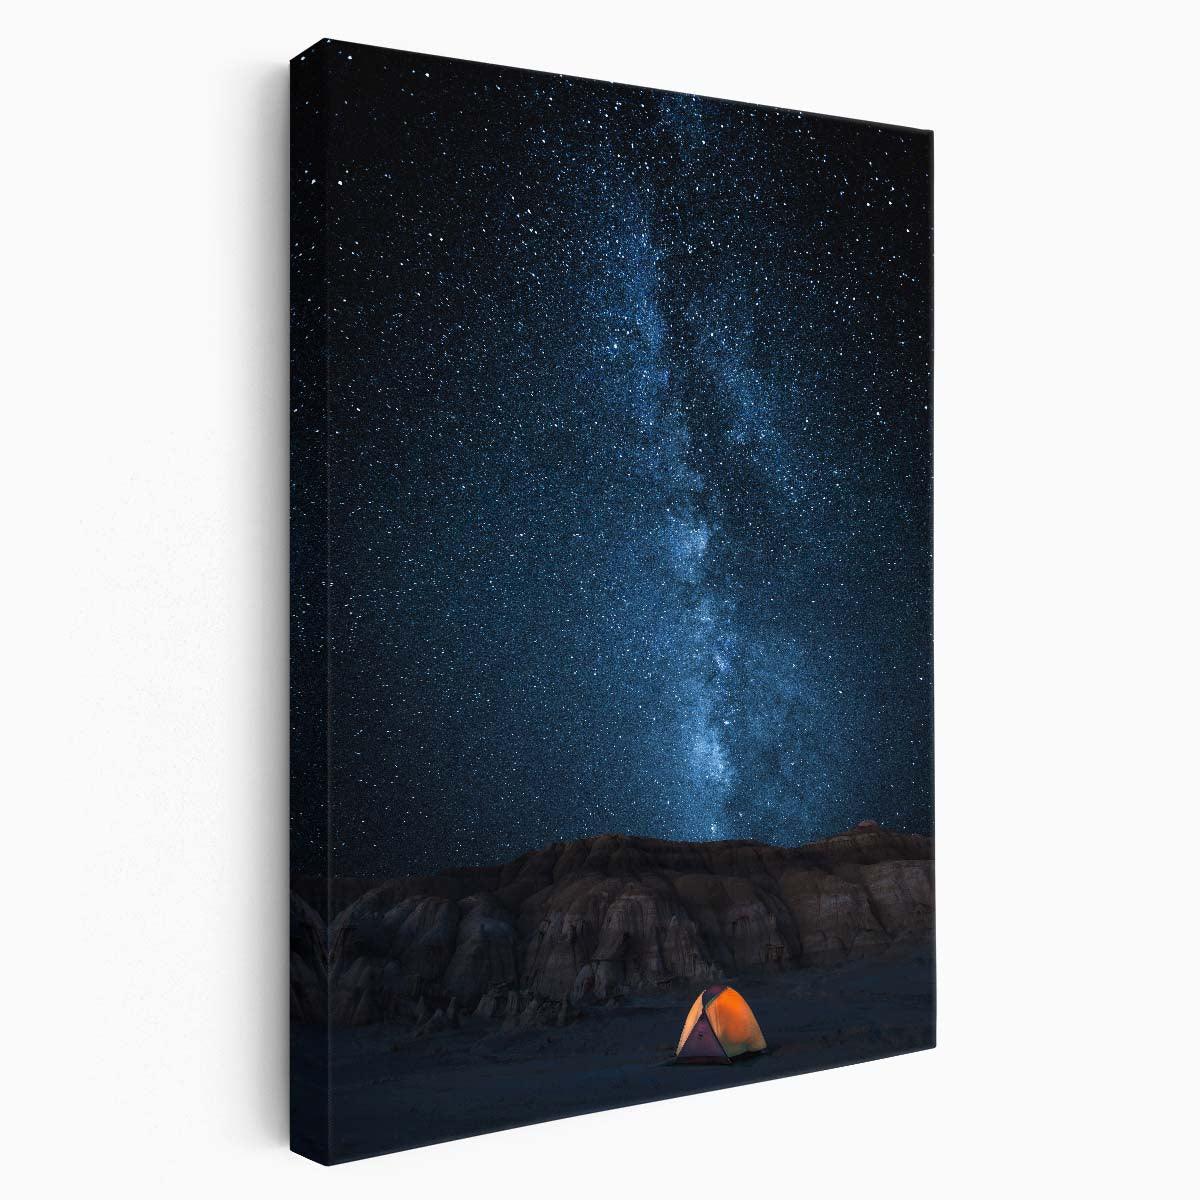 Starry Night Sky Camping Adventure Photography, Bisti, New Mexico by Luxuriance Designs, made in USA